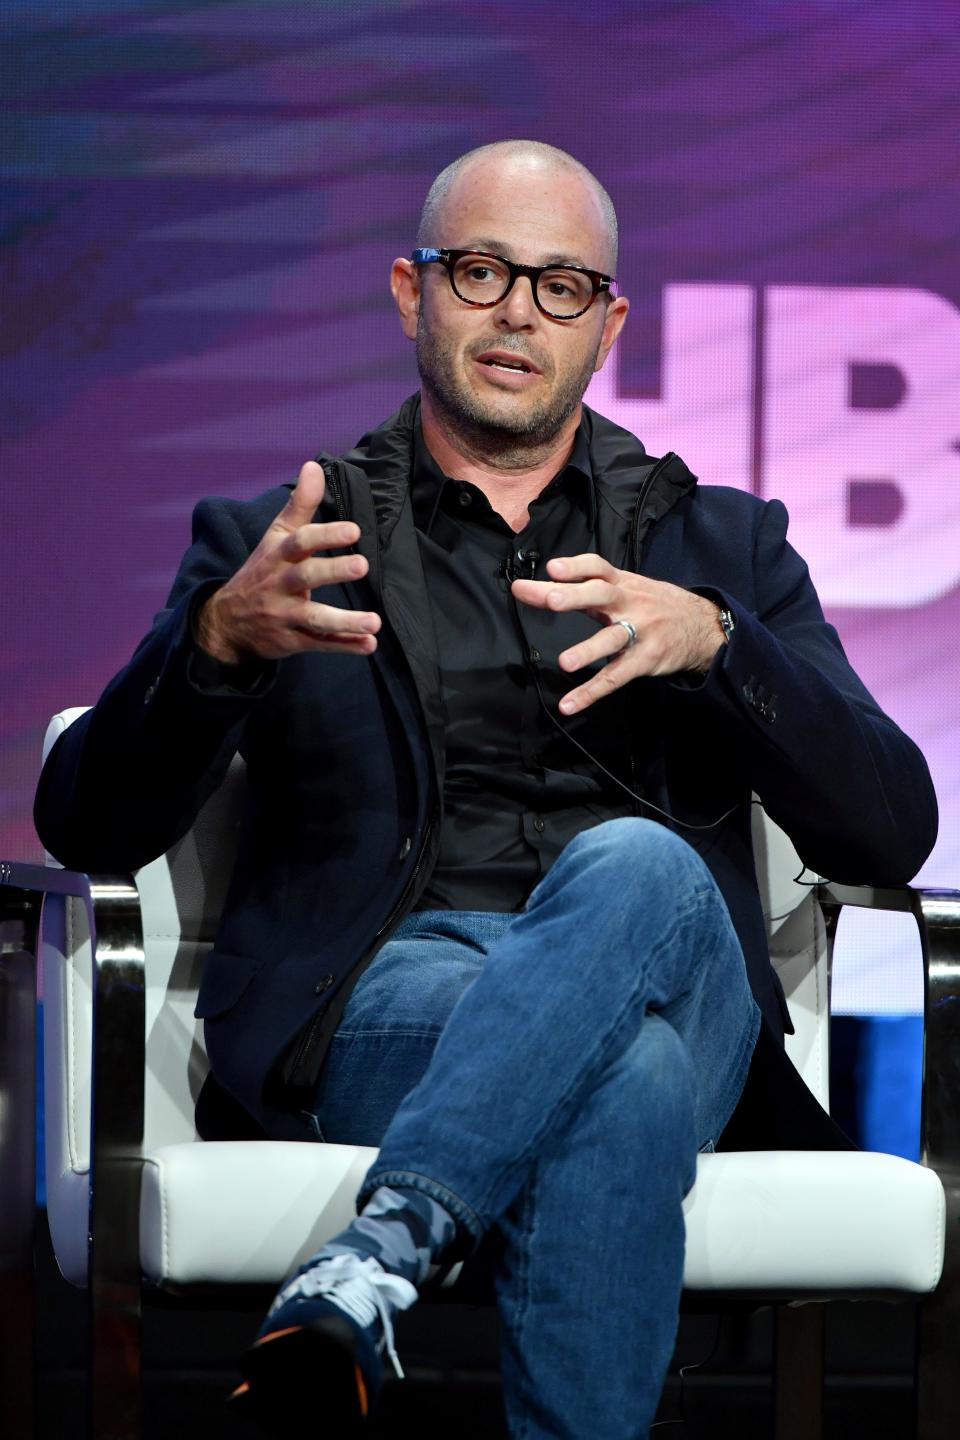 Damon Lindelof of 'Watchmen' speaks during the HBO segment of the Summer 2019 Television Critics Association Press Tour.